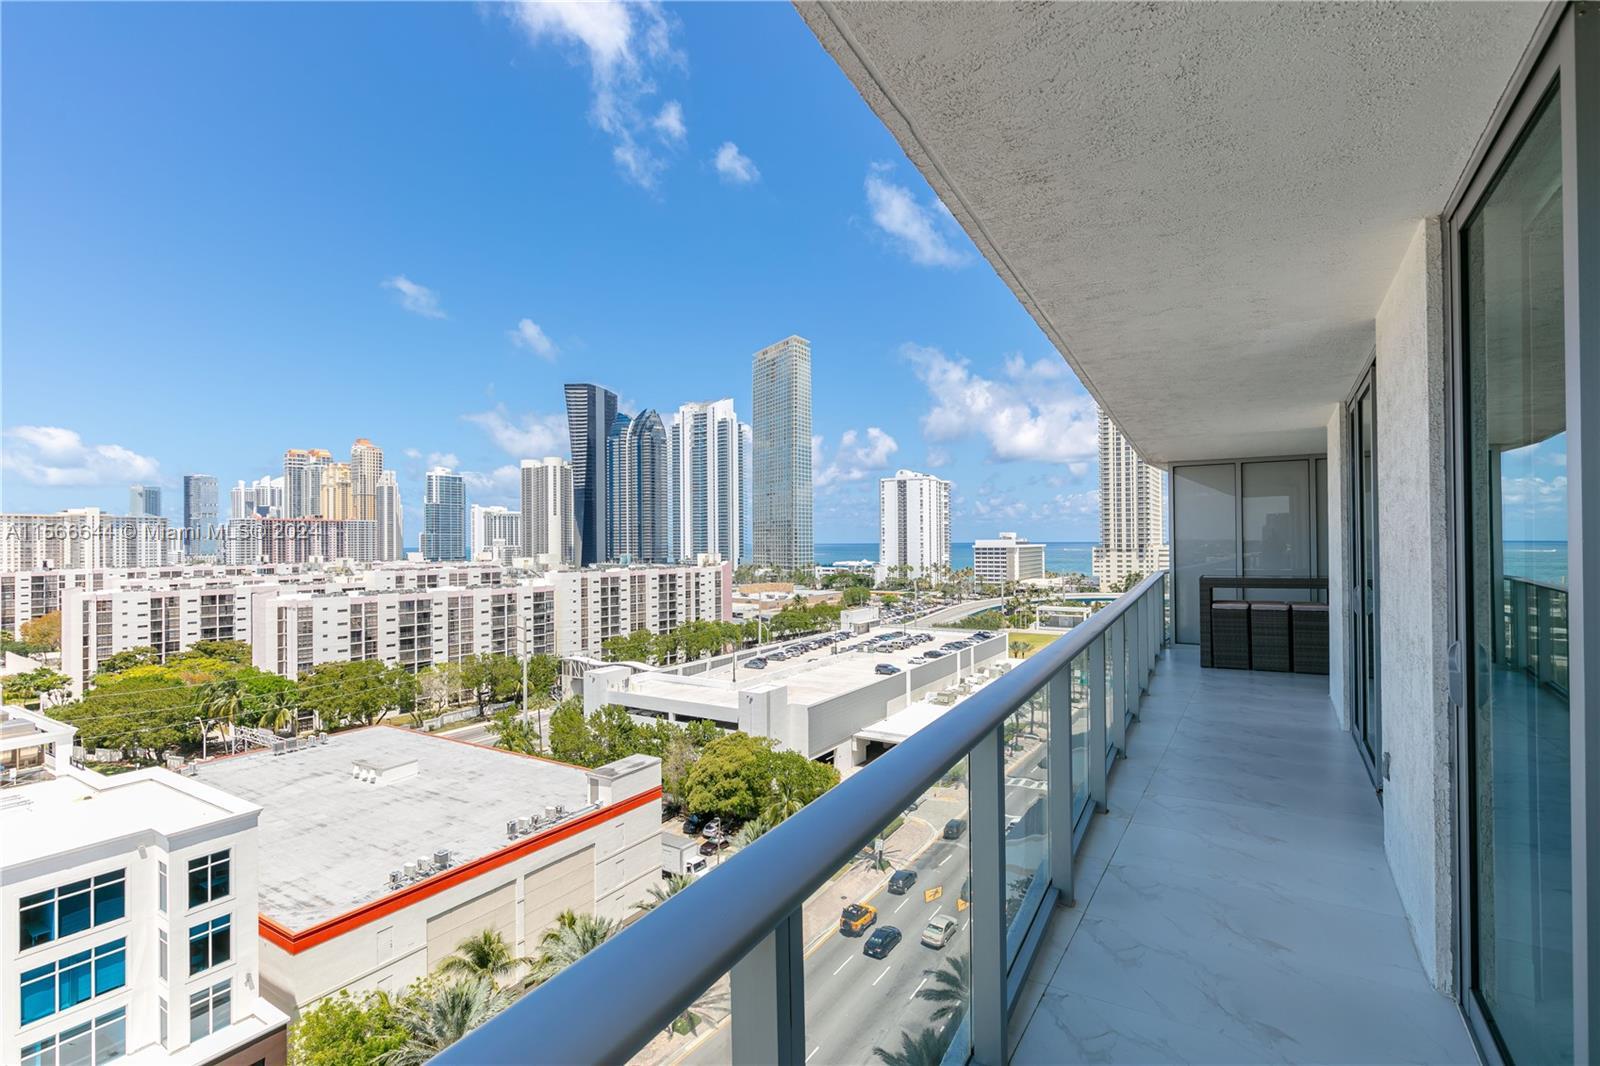 Modern luxury living at 330 Sunny Isles Boulevard, Unit 51103, in Sunny Isles Beach, FL. This chic h